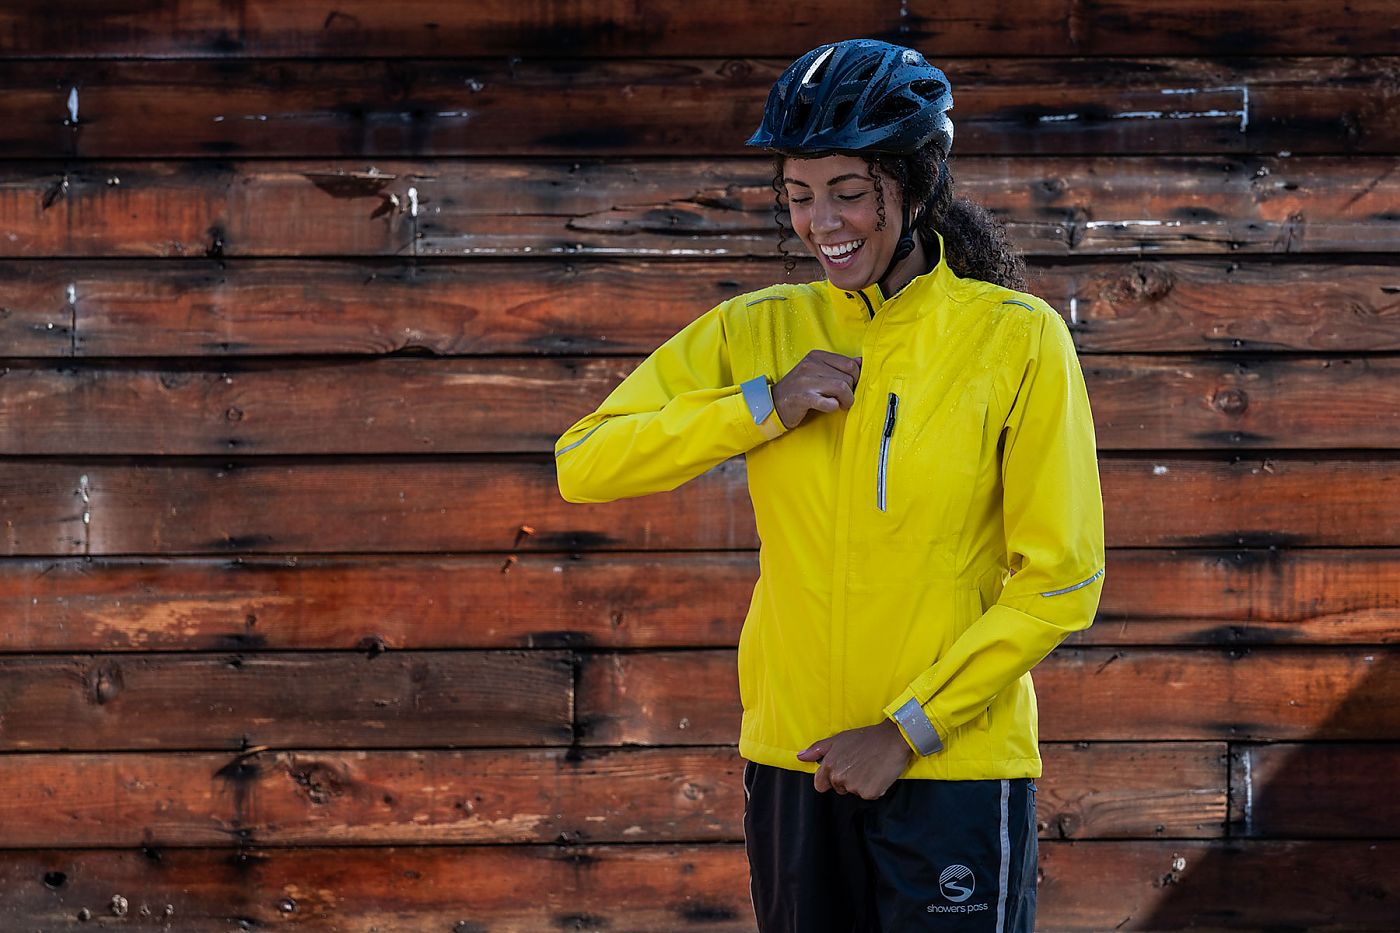 Showers Pass uses sustainable dyes in updated Transit rain jacket